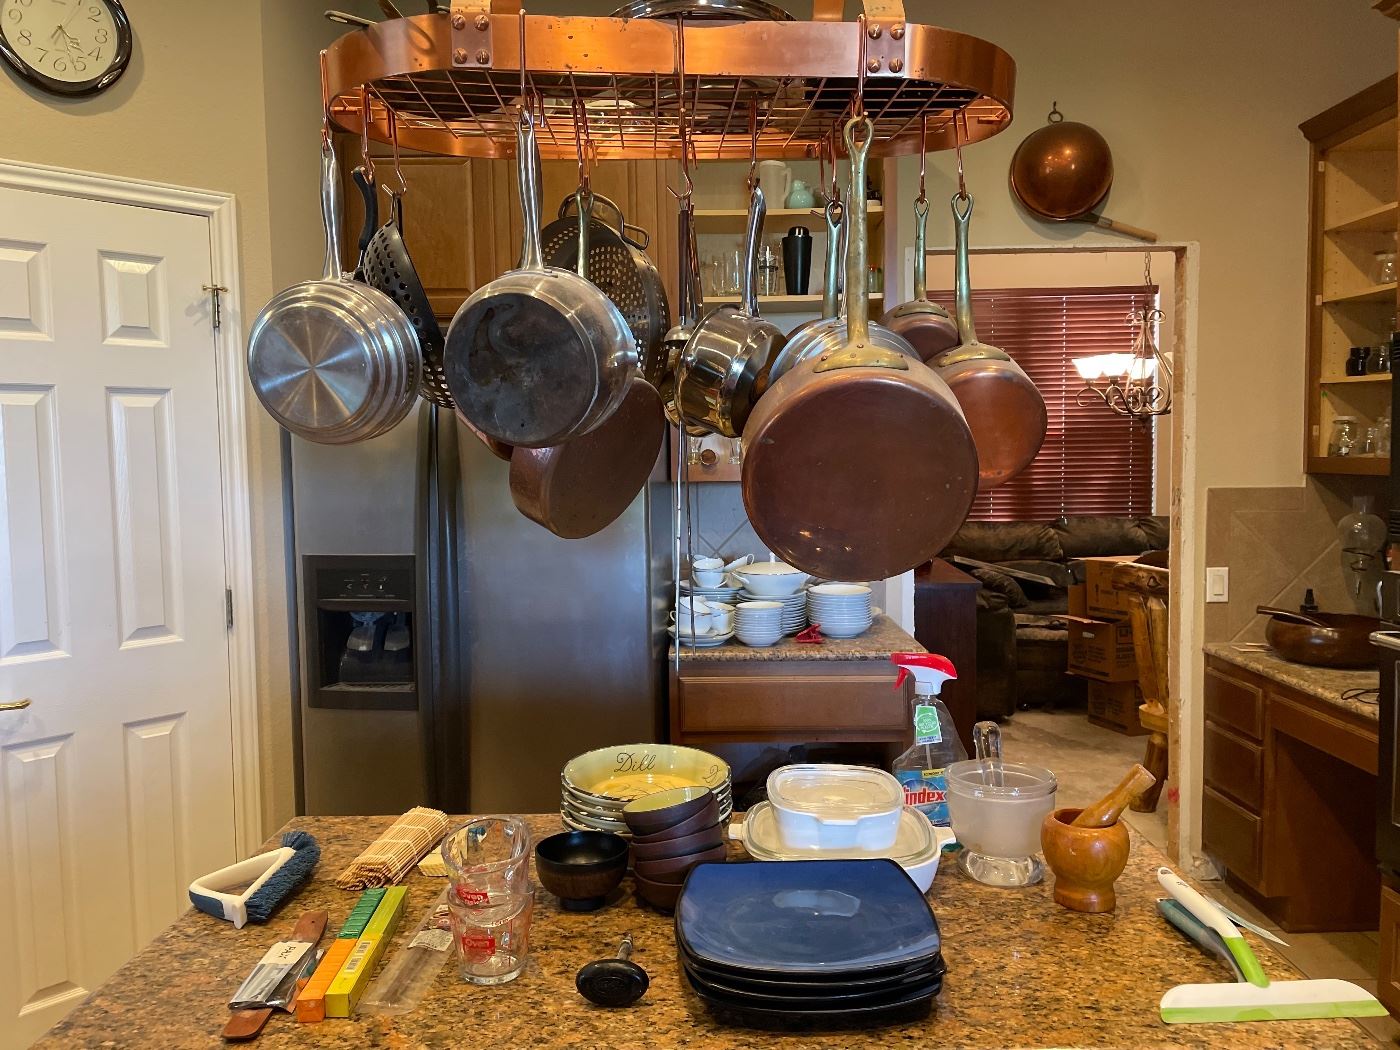 Copper Cookware, Plates, knives, pots and pans